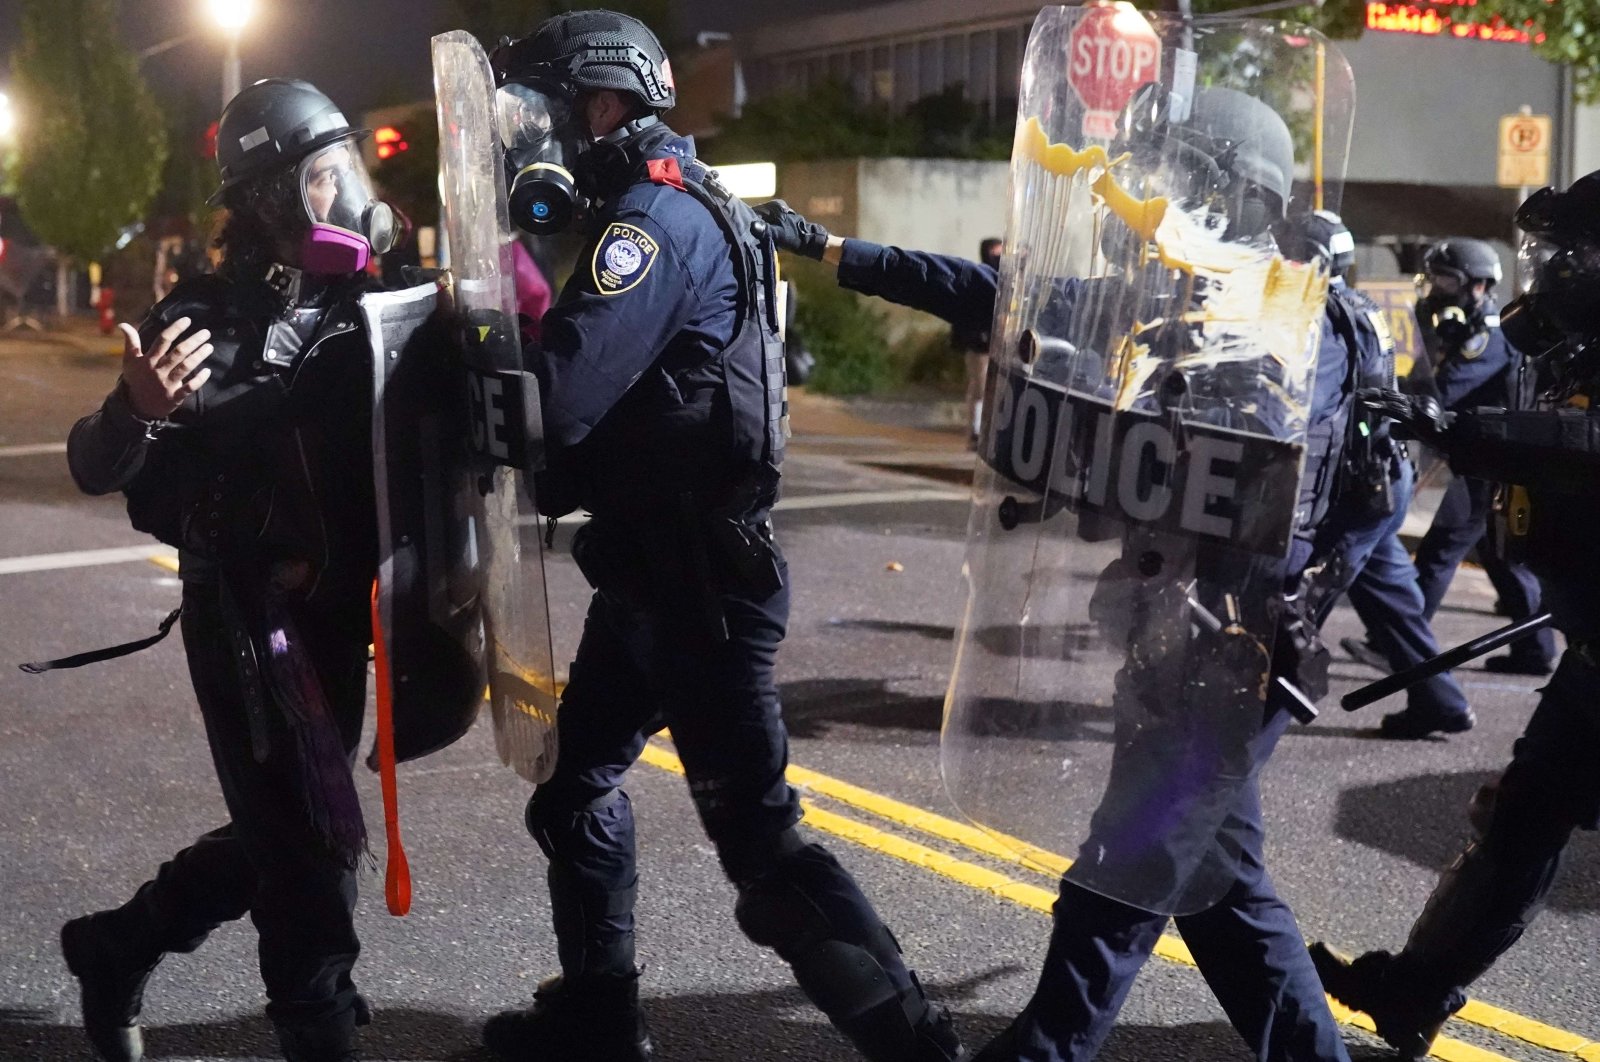 Federal officers use riot shields to push a protester while dispersing a crowd of about 150 people from in front of the Immigration and Customs Enforcement (ICE) detention facility in Portland, Oregon, U.S., Aug. 20, 2020. (AFP/Getty Images)